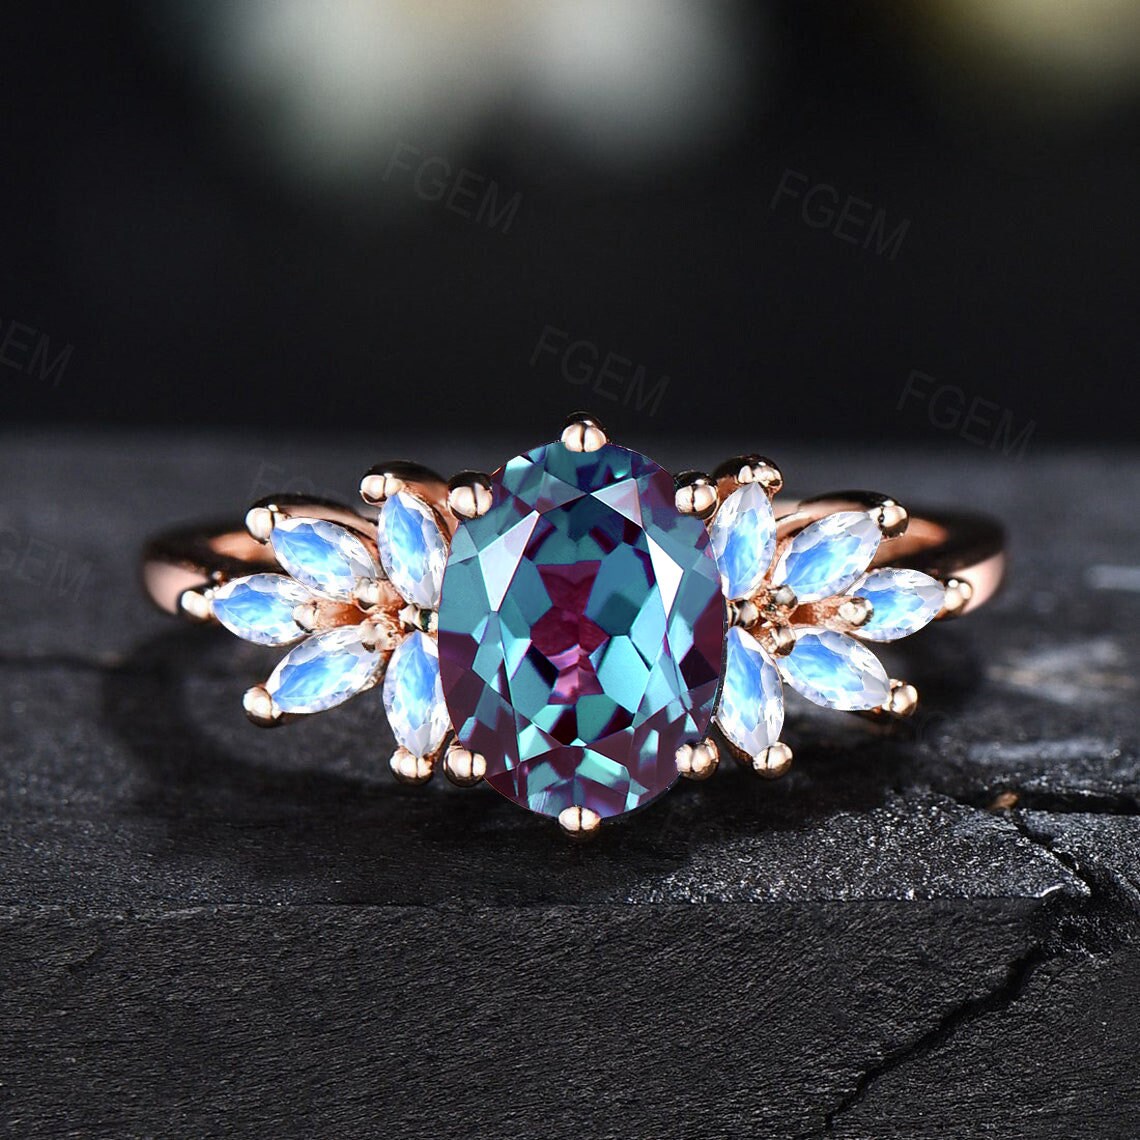 June Heart Birthstone Children's Ring with Synthetic Alexandrite in 10K Gold - Size 3 1/2 | Jewelry Vine